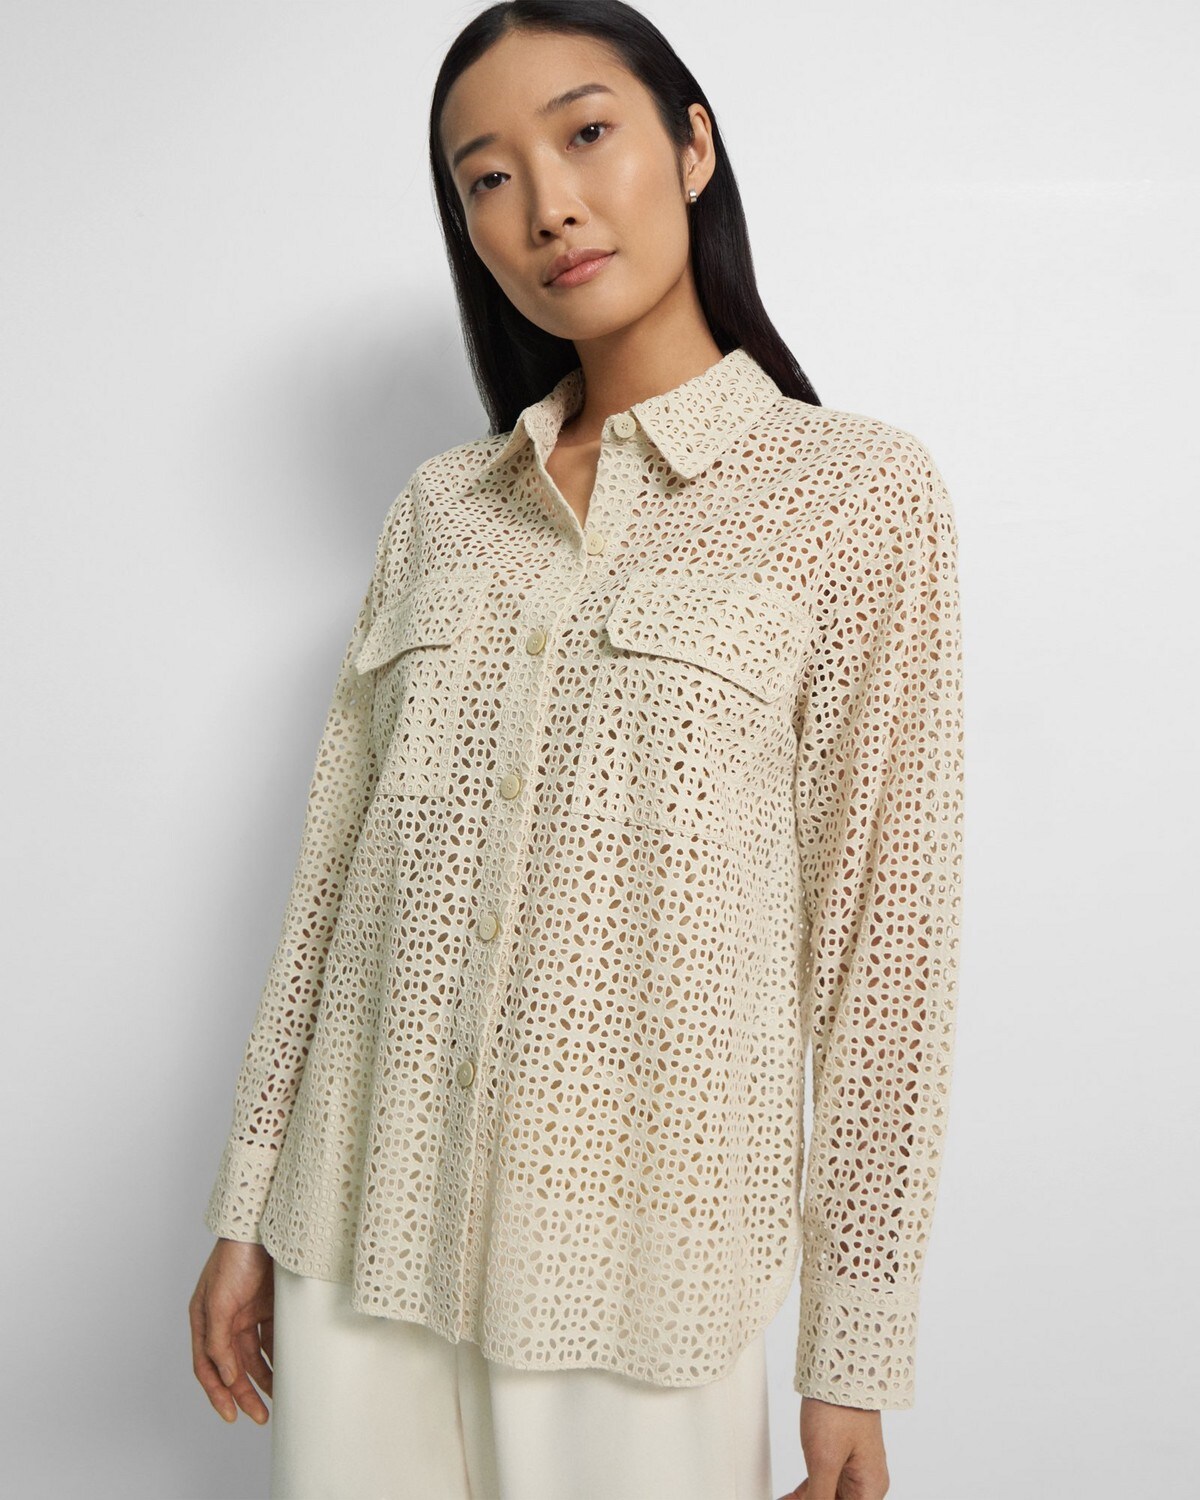 Patch Pocket Shirt in Cotton Eyelet